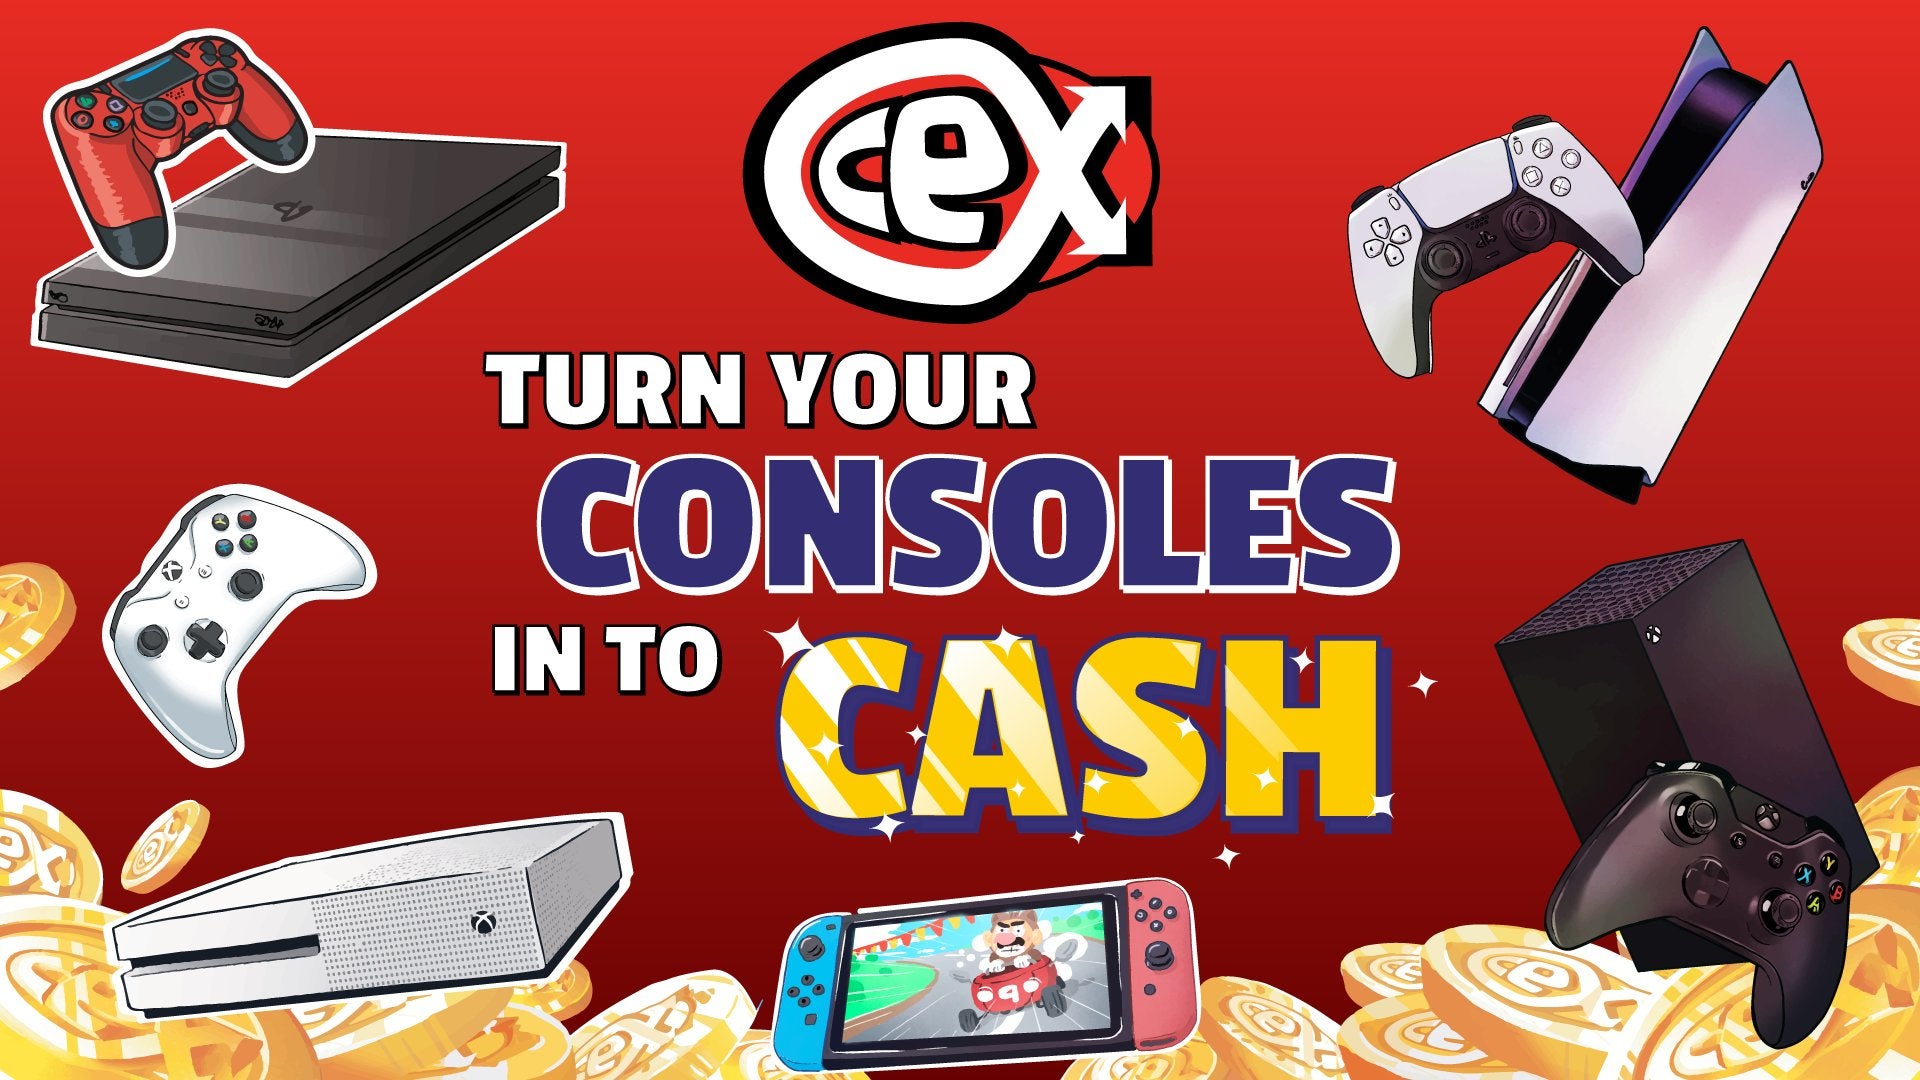 Image for CEX is charging £815 for PS5s and customers are furious